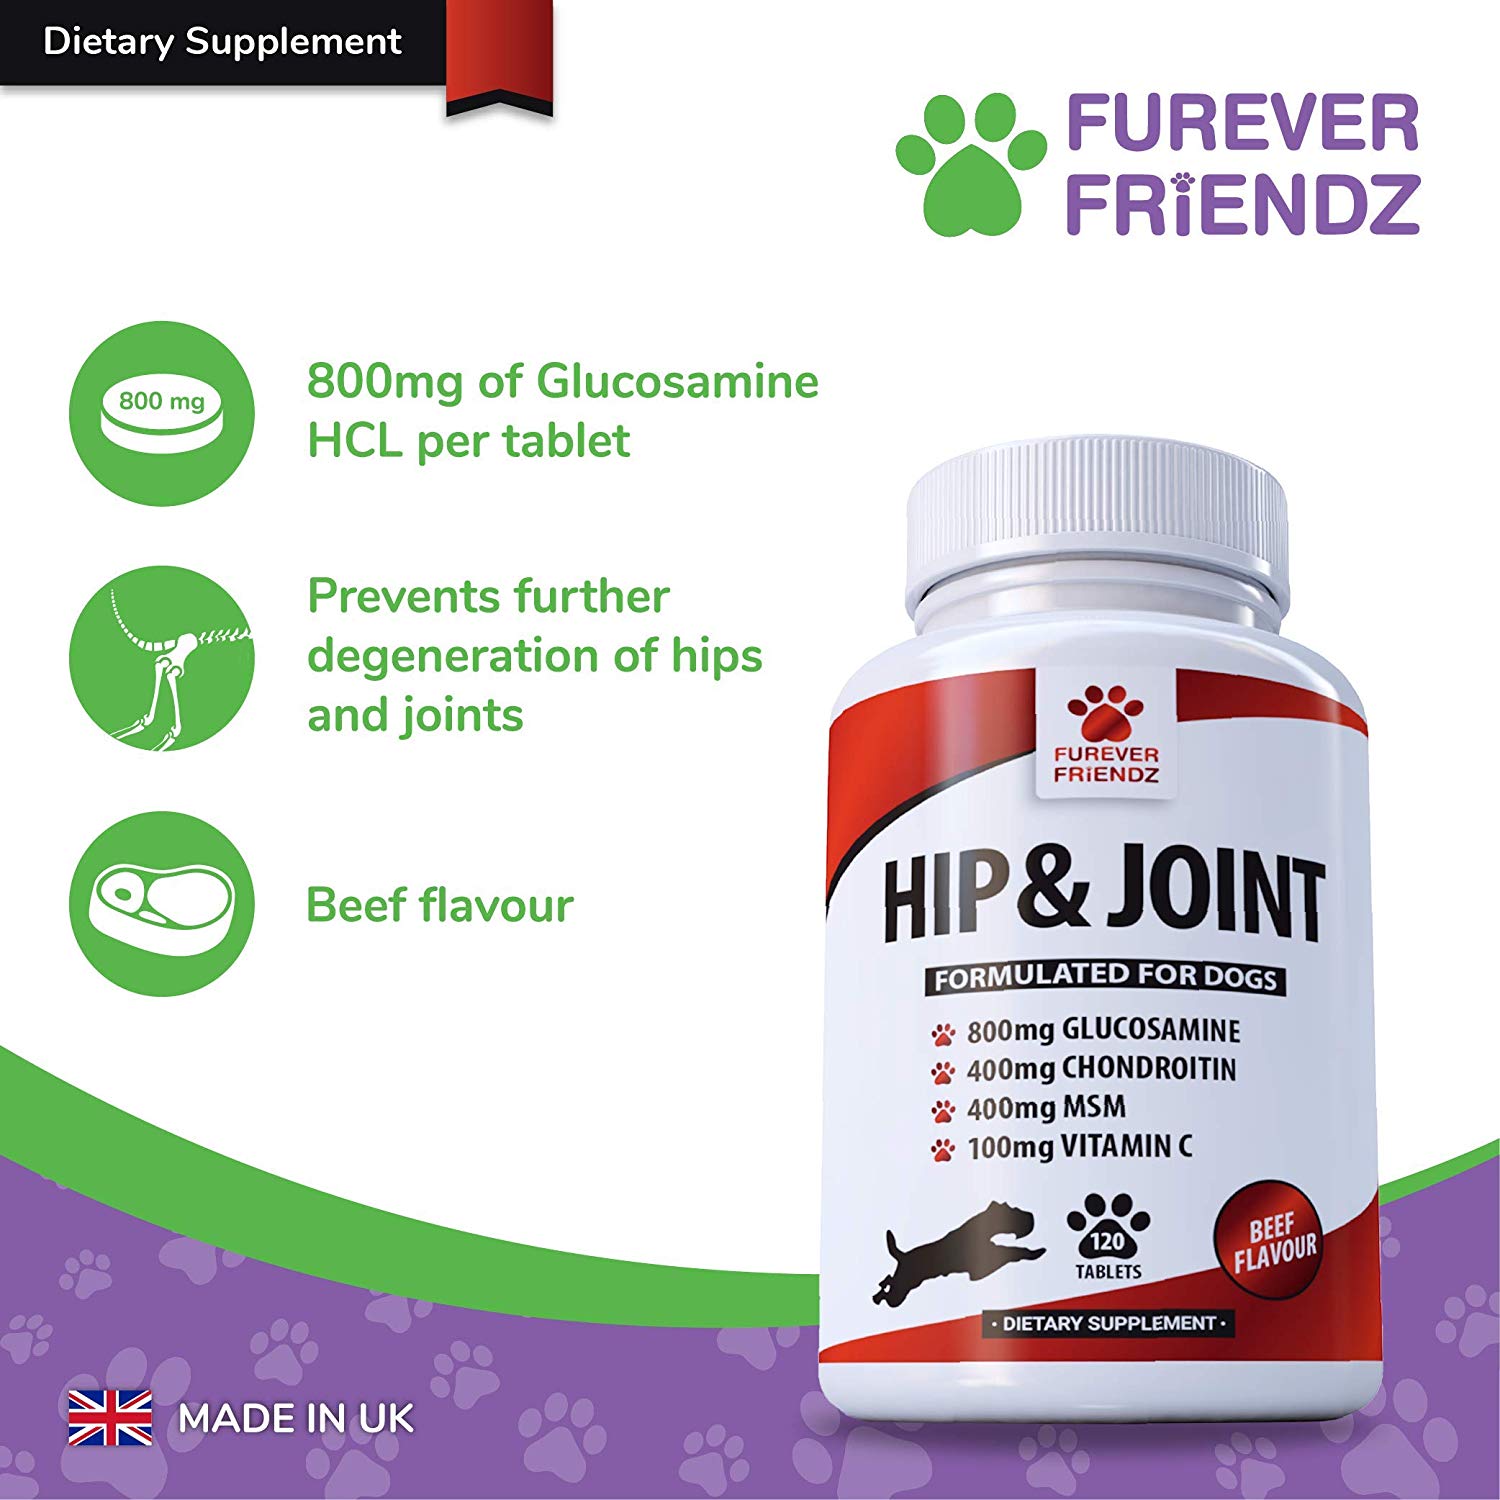 Triple Stength 800mg Glucosamine for Dogs with Chondroitin, MSM & Vitamin C (Beef Flavour Tablets)